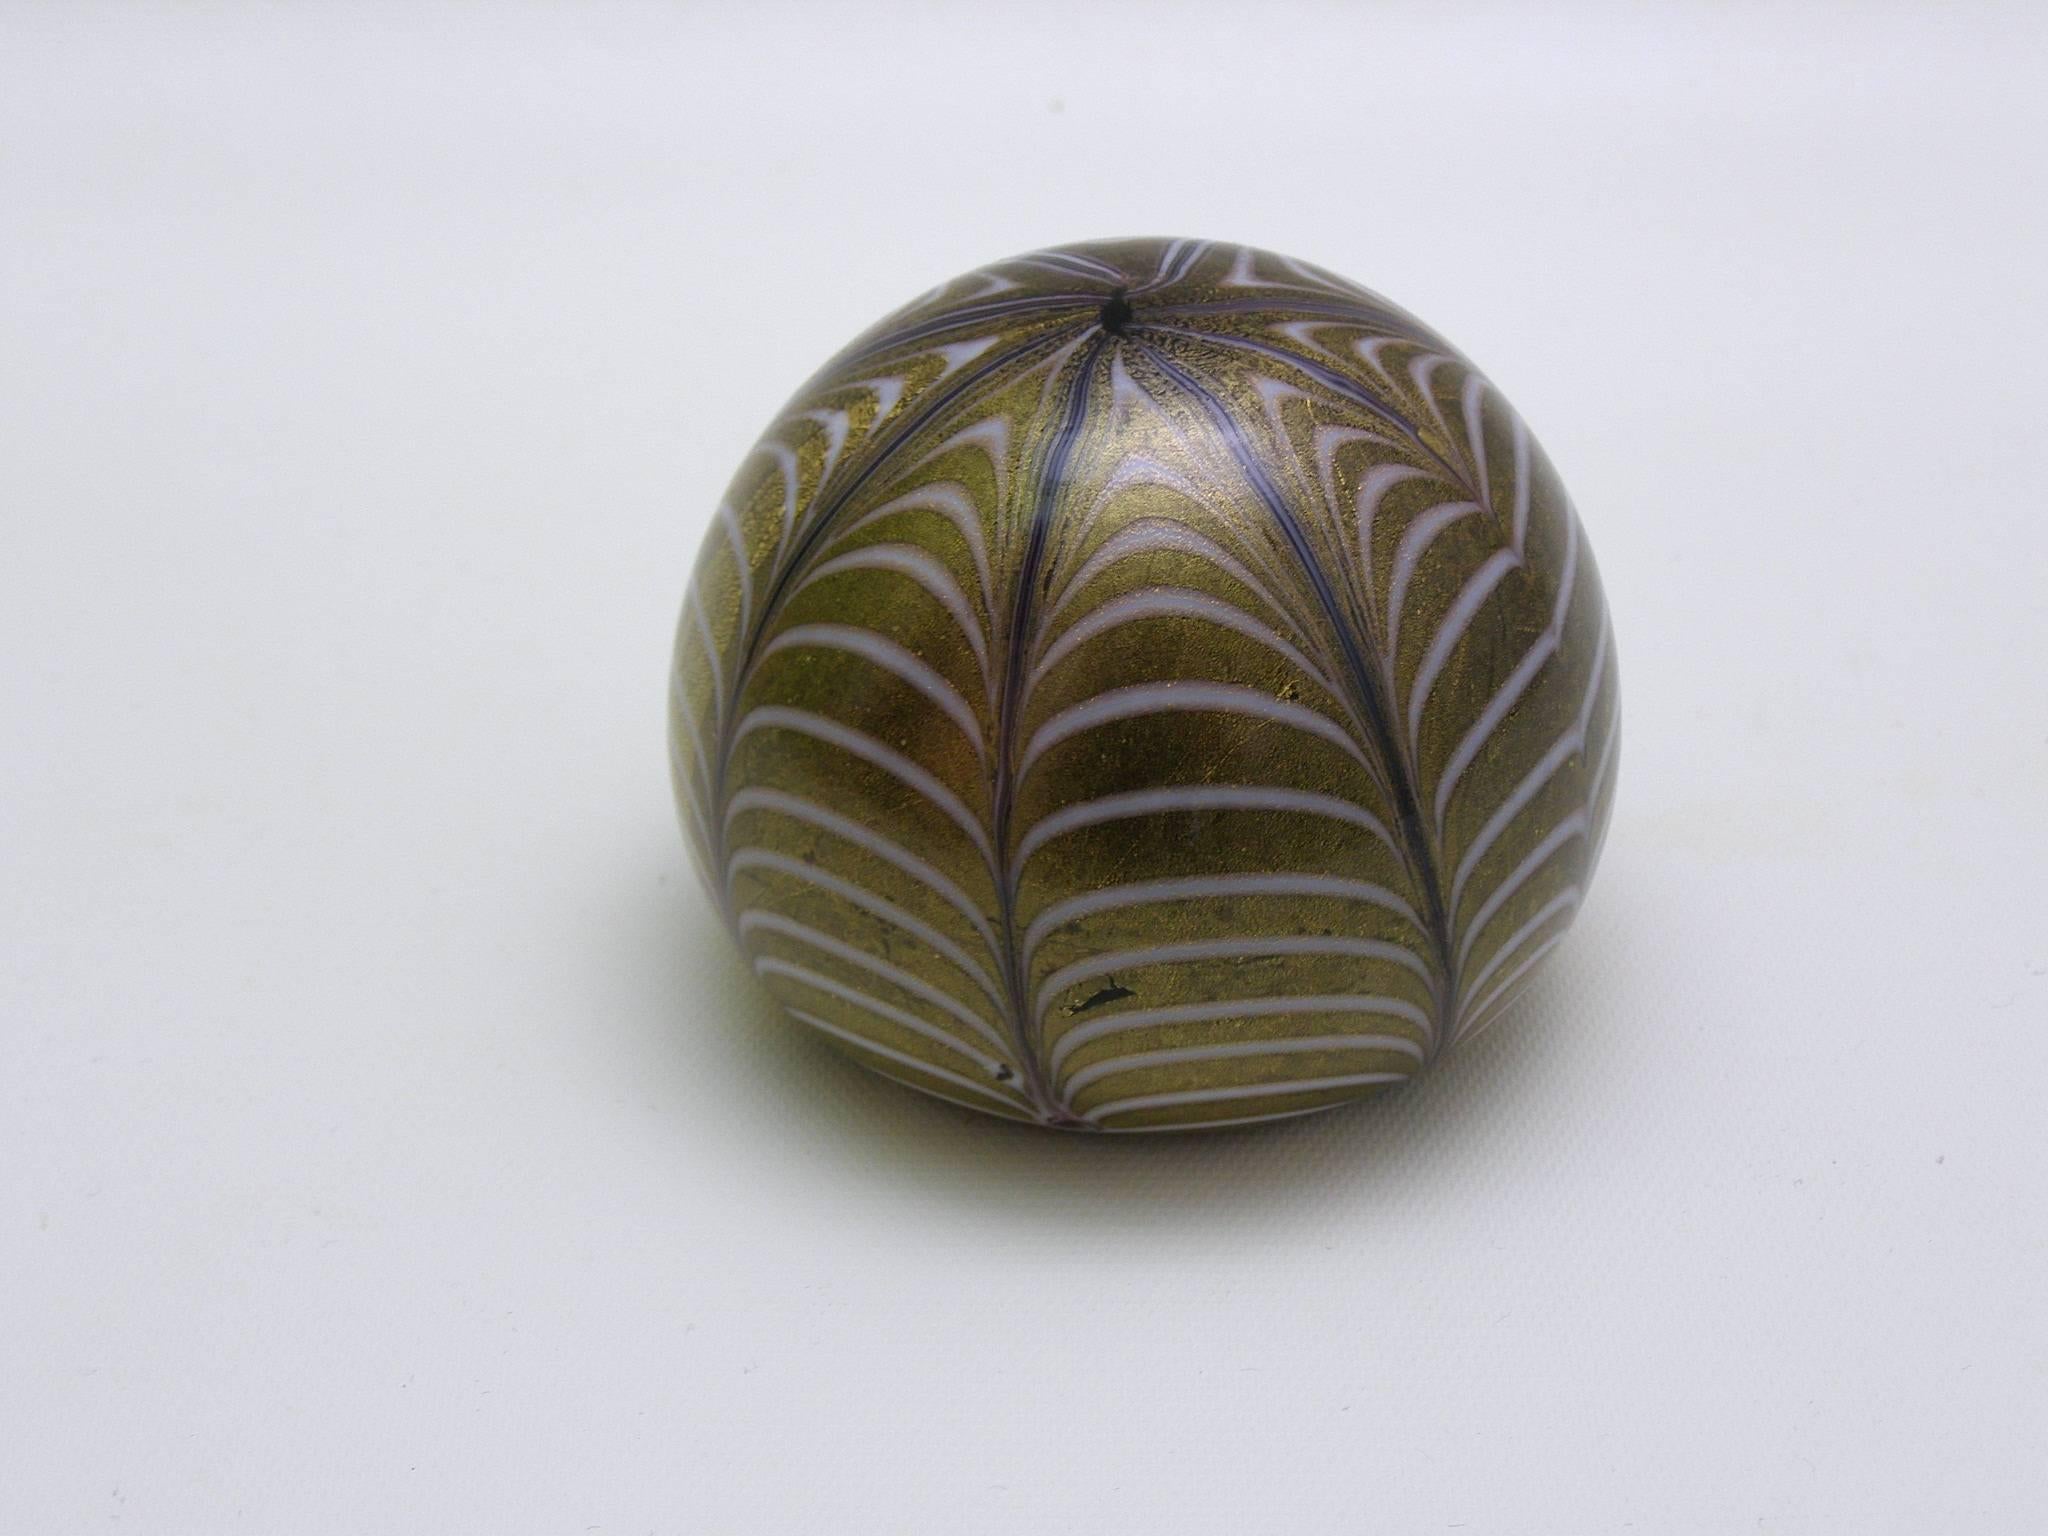 Attractive handblown Murano glass paperweight with a spiderweb pattern. Looking from the top there is a starfish pattern. In hues of gold and green and white, this smooth and precious paperweight is perfect for desktop or for display.